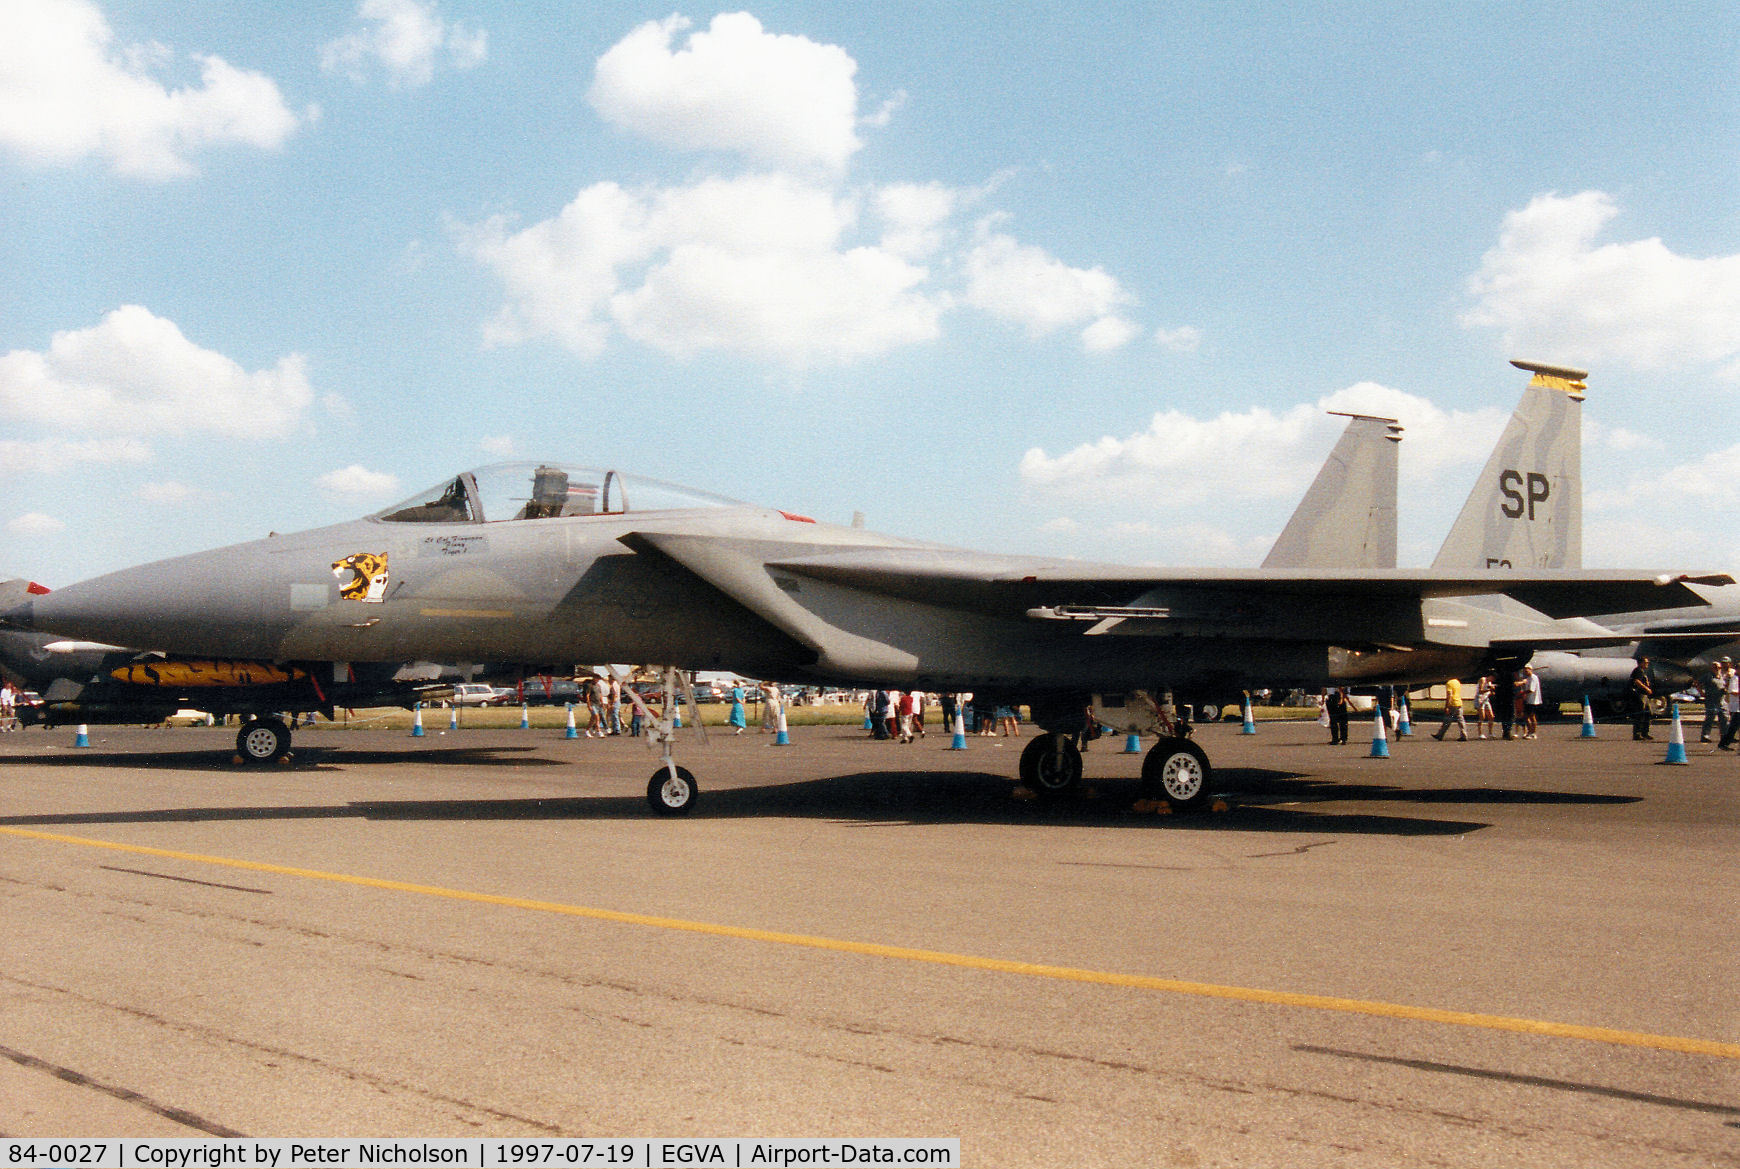 84-0027, 1984 McDonnell Douglas F-15C Eagle C/N 0938/C330, F-15C Eagle, callsign Duster 02, of 53rd Fighter Squadron/52nd Fighter Wing on display at the 1997 Intnl Air Tattoo at RAF Fairford.